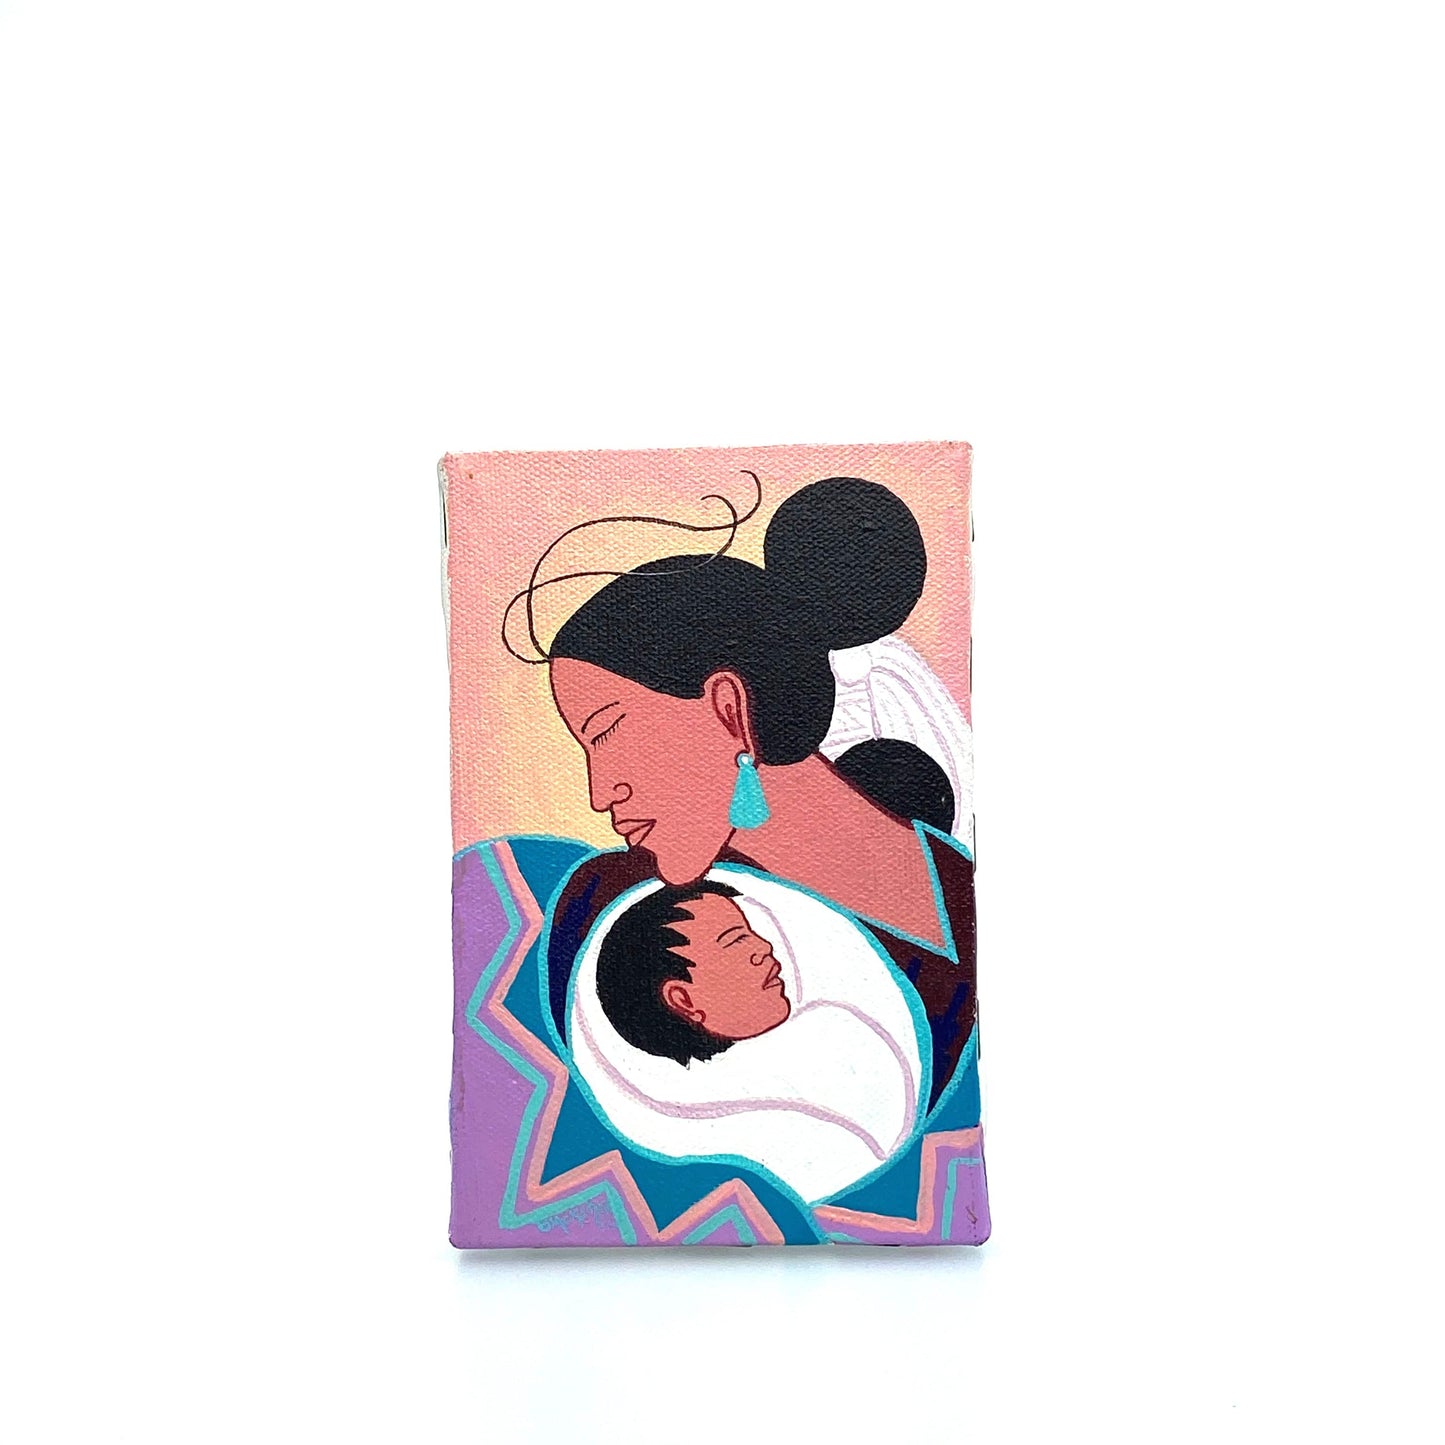 Navajo Hand Painted Mother and Child by Beverly Blacksheep 5.75” x 3.5” Canvas on Wood